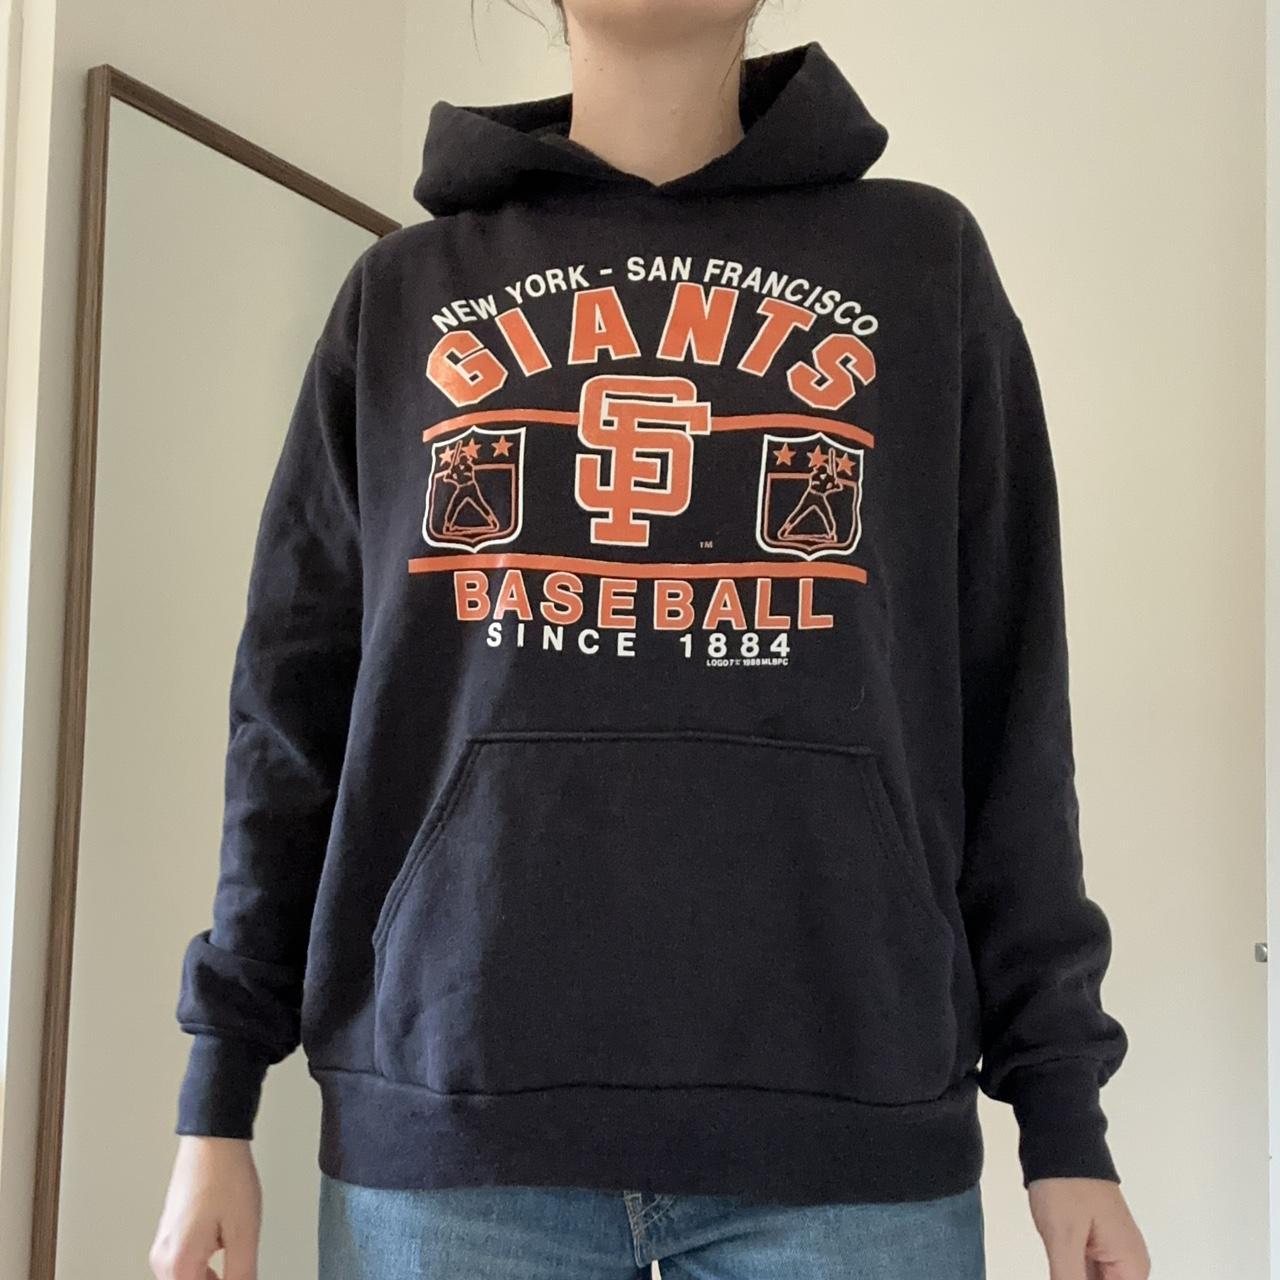 San Francisco Giants Hoodie It's a youth large so - Depop